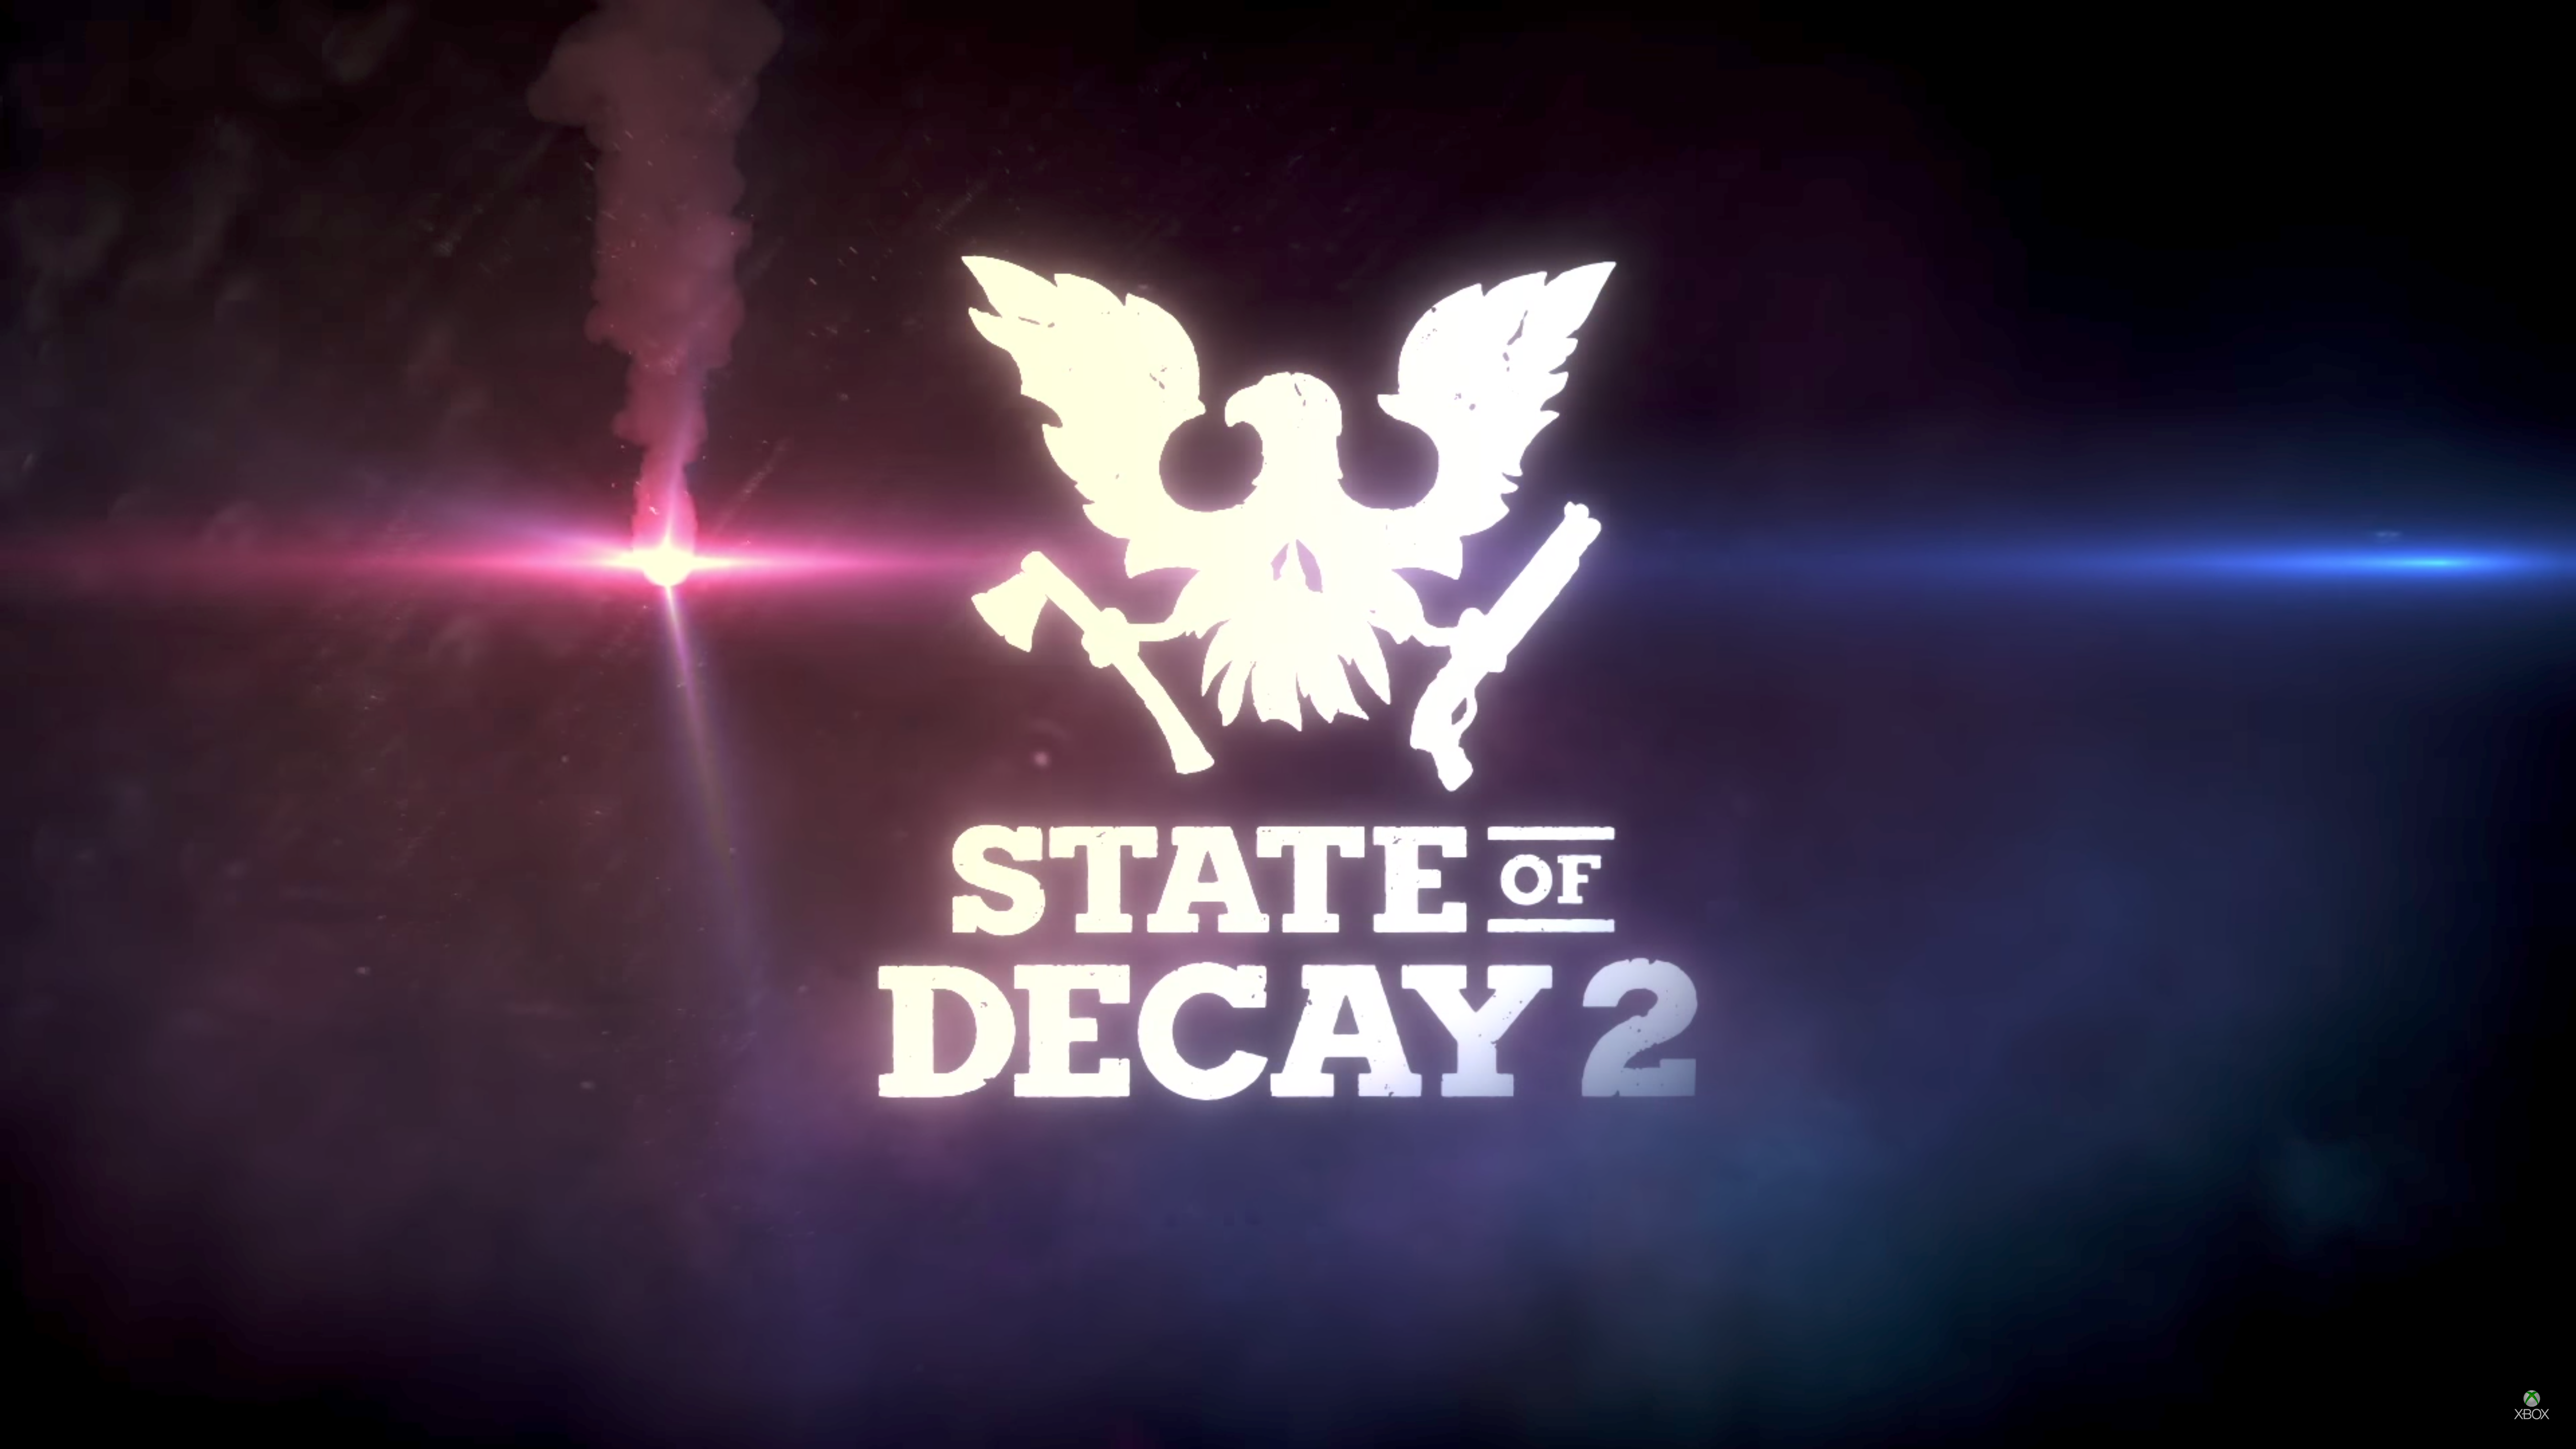 State of Decay 2 4K Reveal Trailer - E3 2017: Microsoft Conference